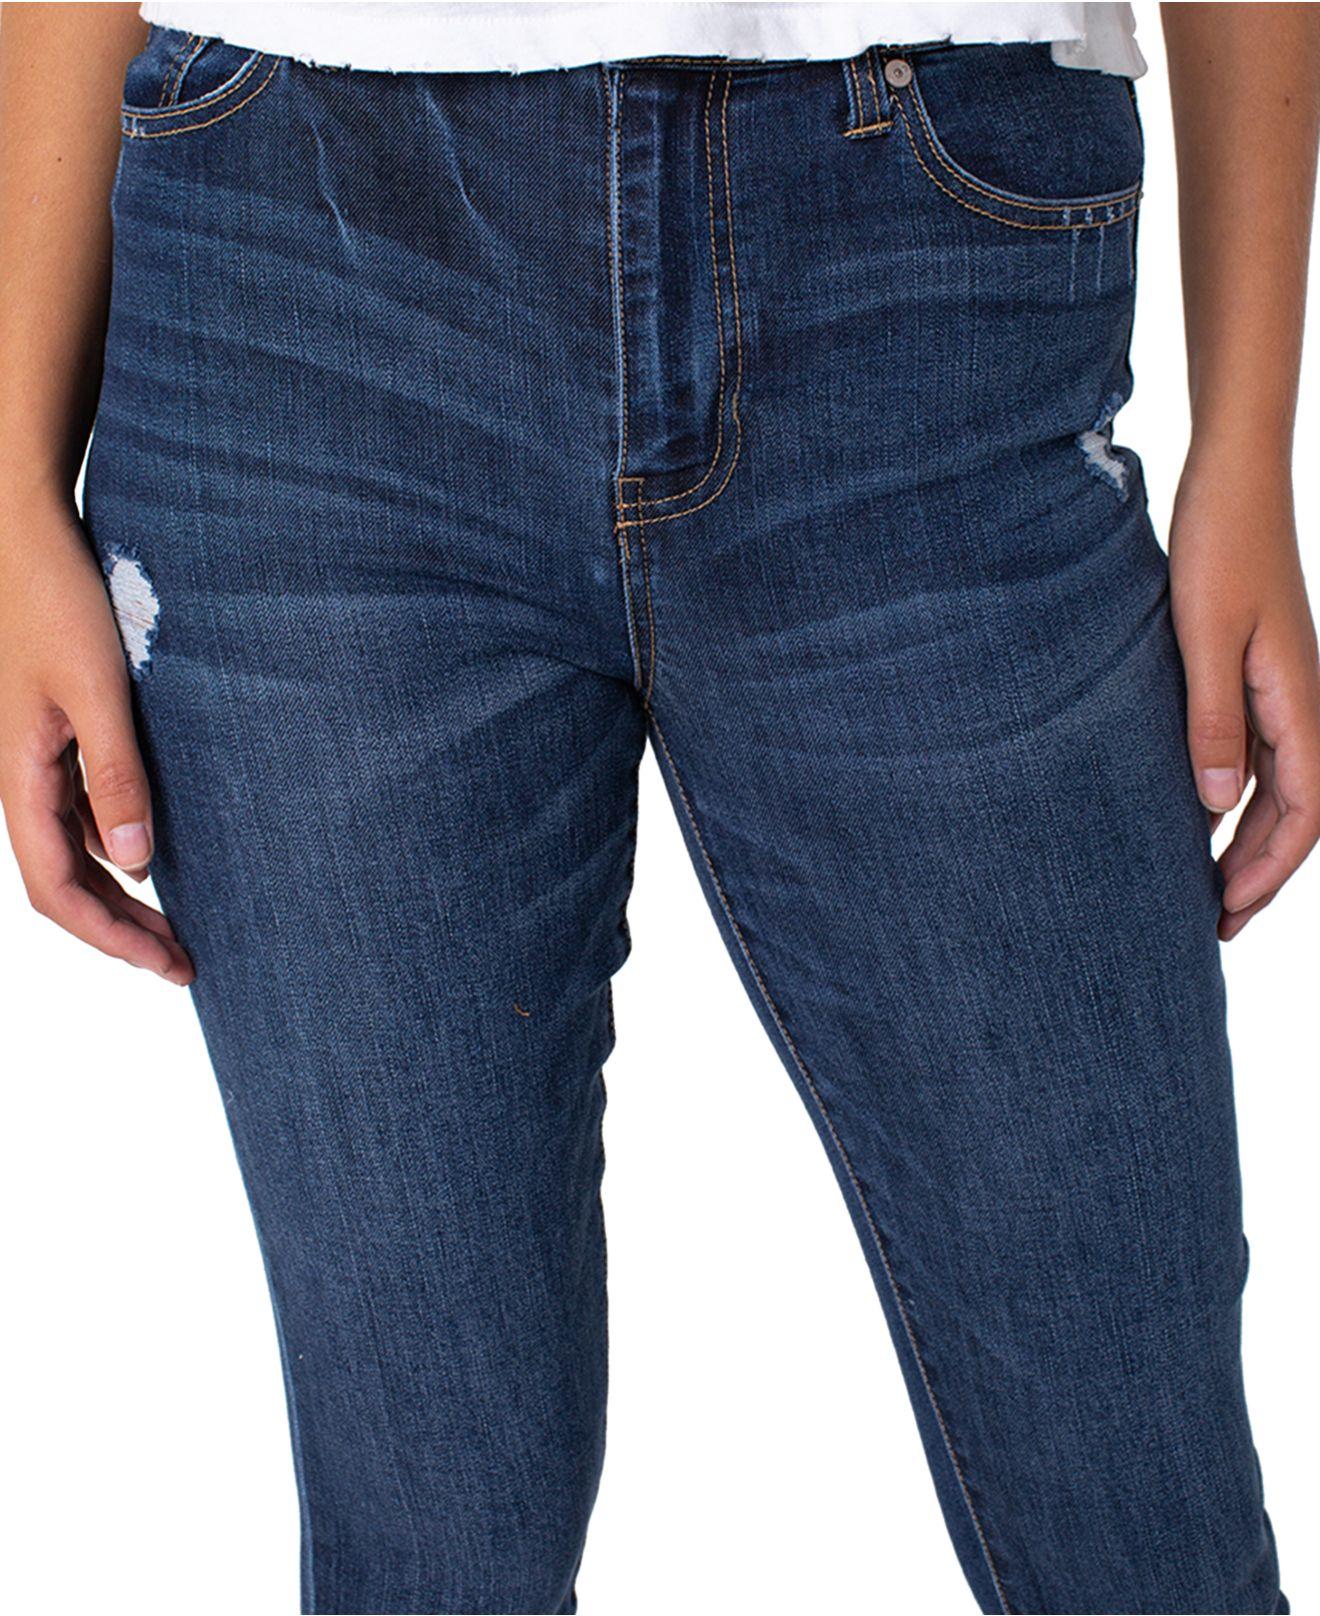 Kendall + Kylie Denim Kontour High Rise Ripped Skinny Jeans in Blue - Lyst